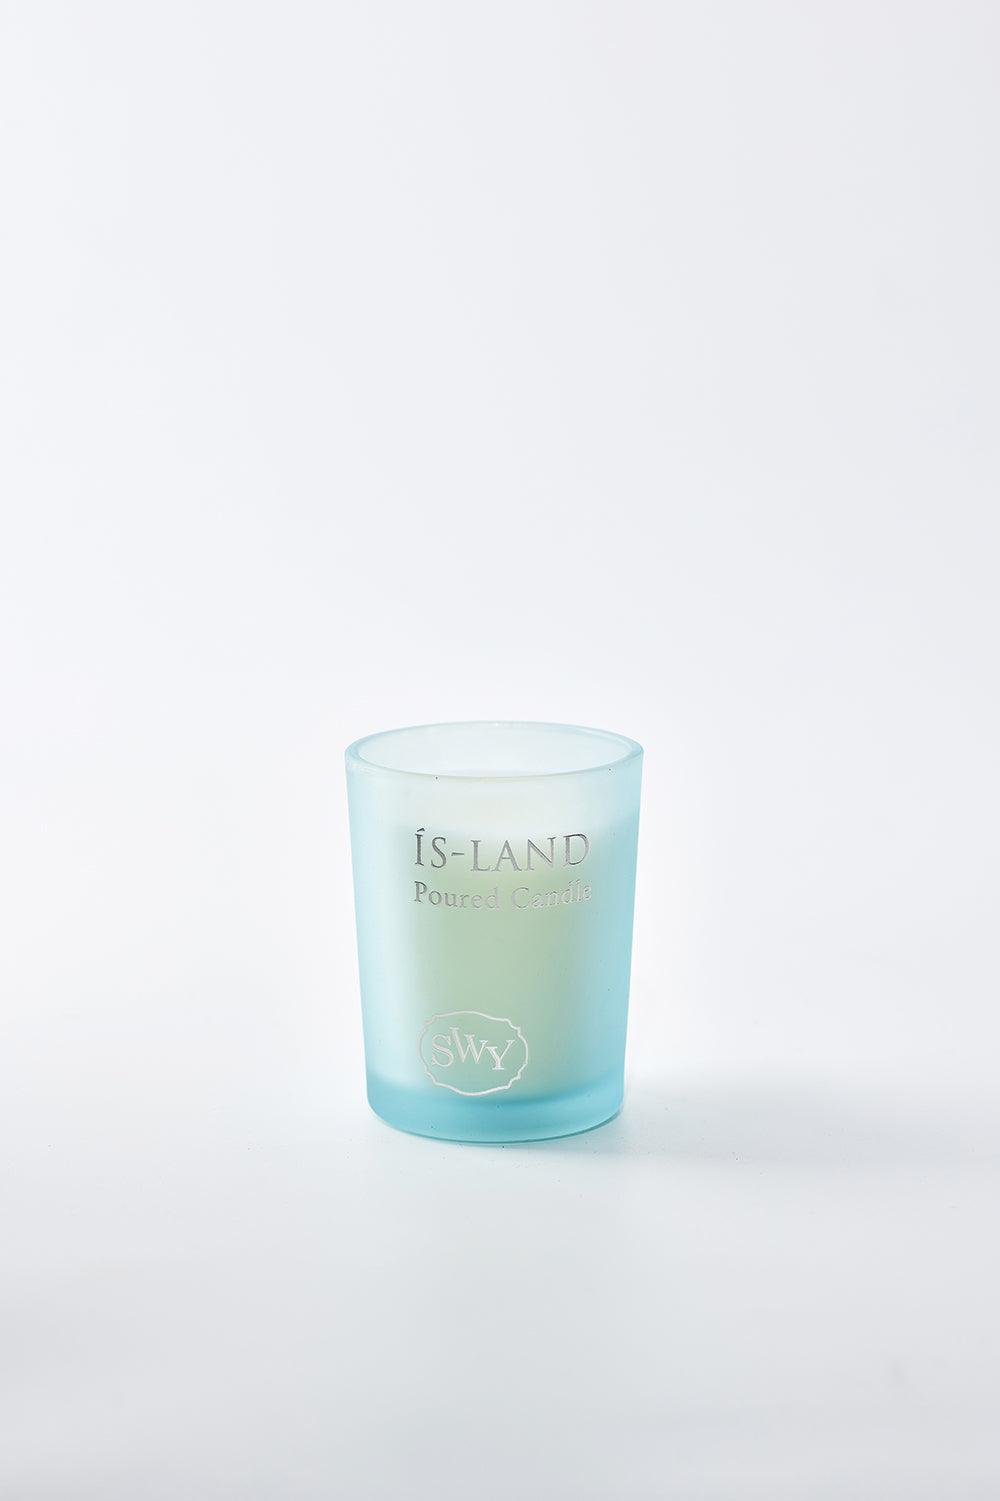 Poured Candle – Is-land - SWY - Scent With You